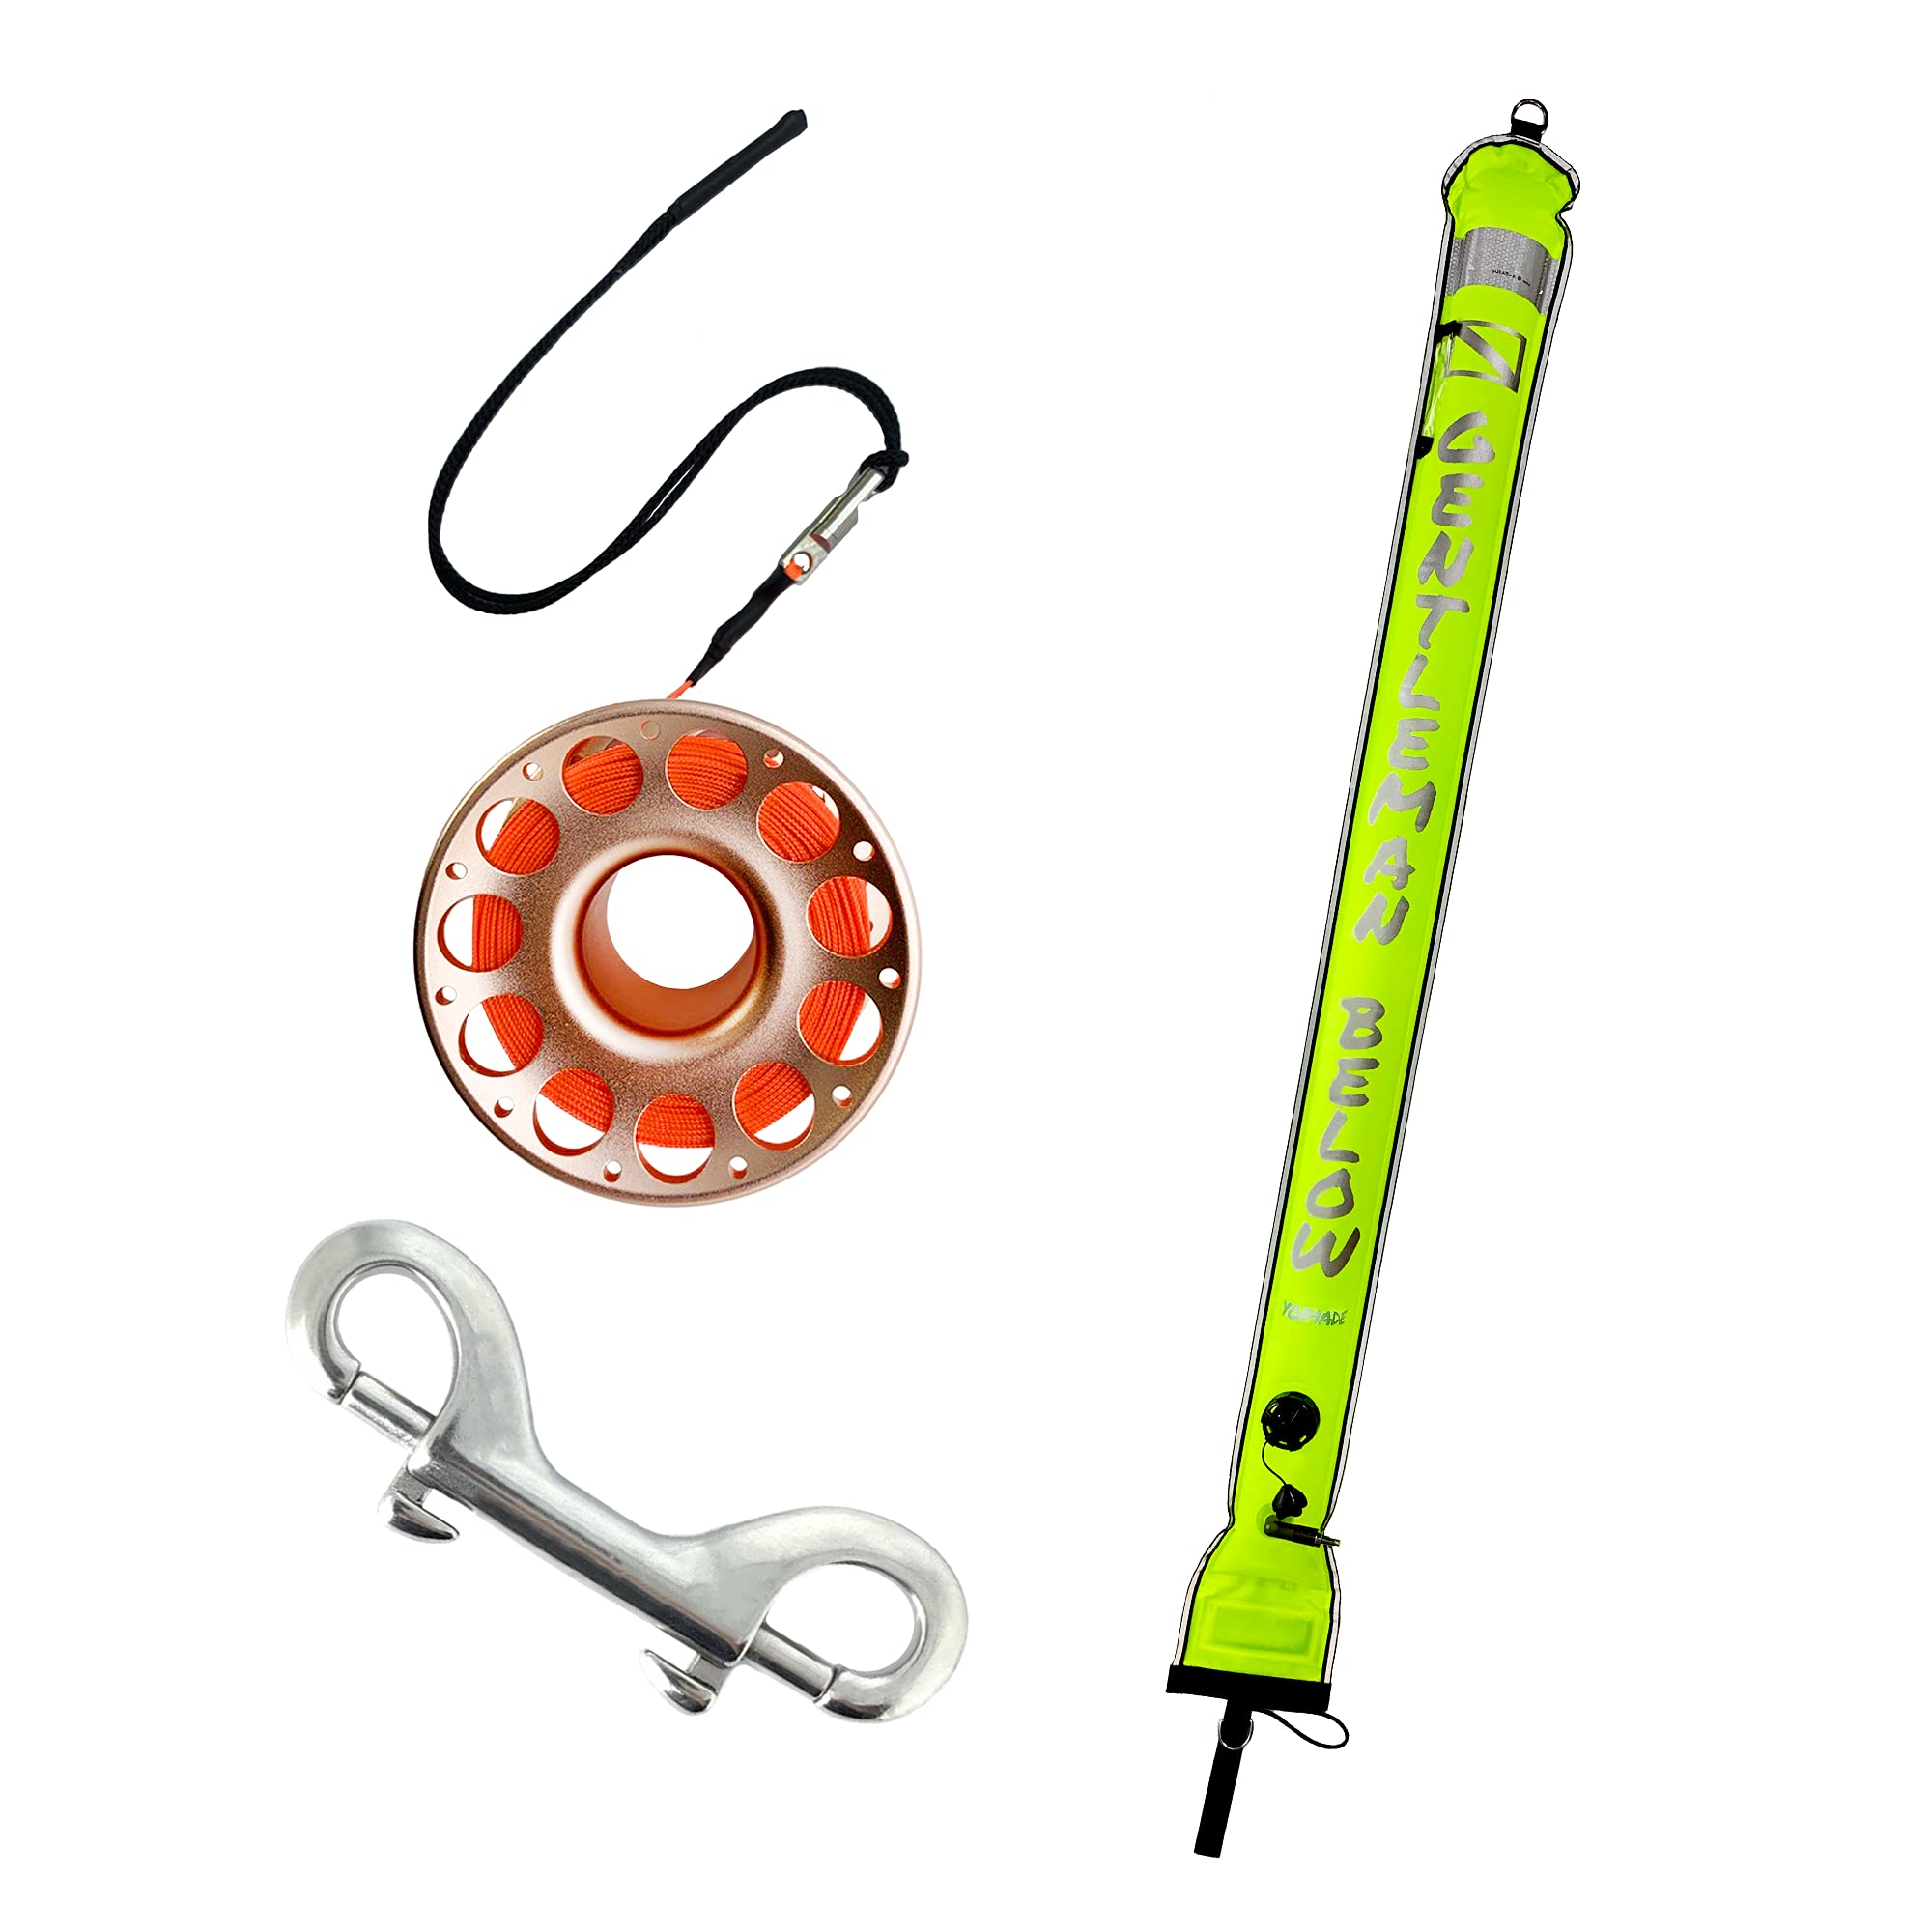 YOMADE Delayed Surface Marker Buoy (DSMB) Kit, Gentleman Below Reflective Logo, Fluorescent Yellow, 5 ft/1.5 m Long with 98 ft/30 m Champagne Gold Aluminum Alloy Finger Spool